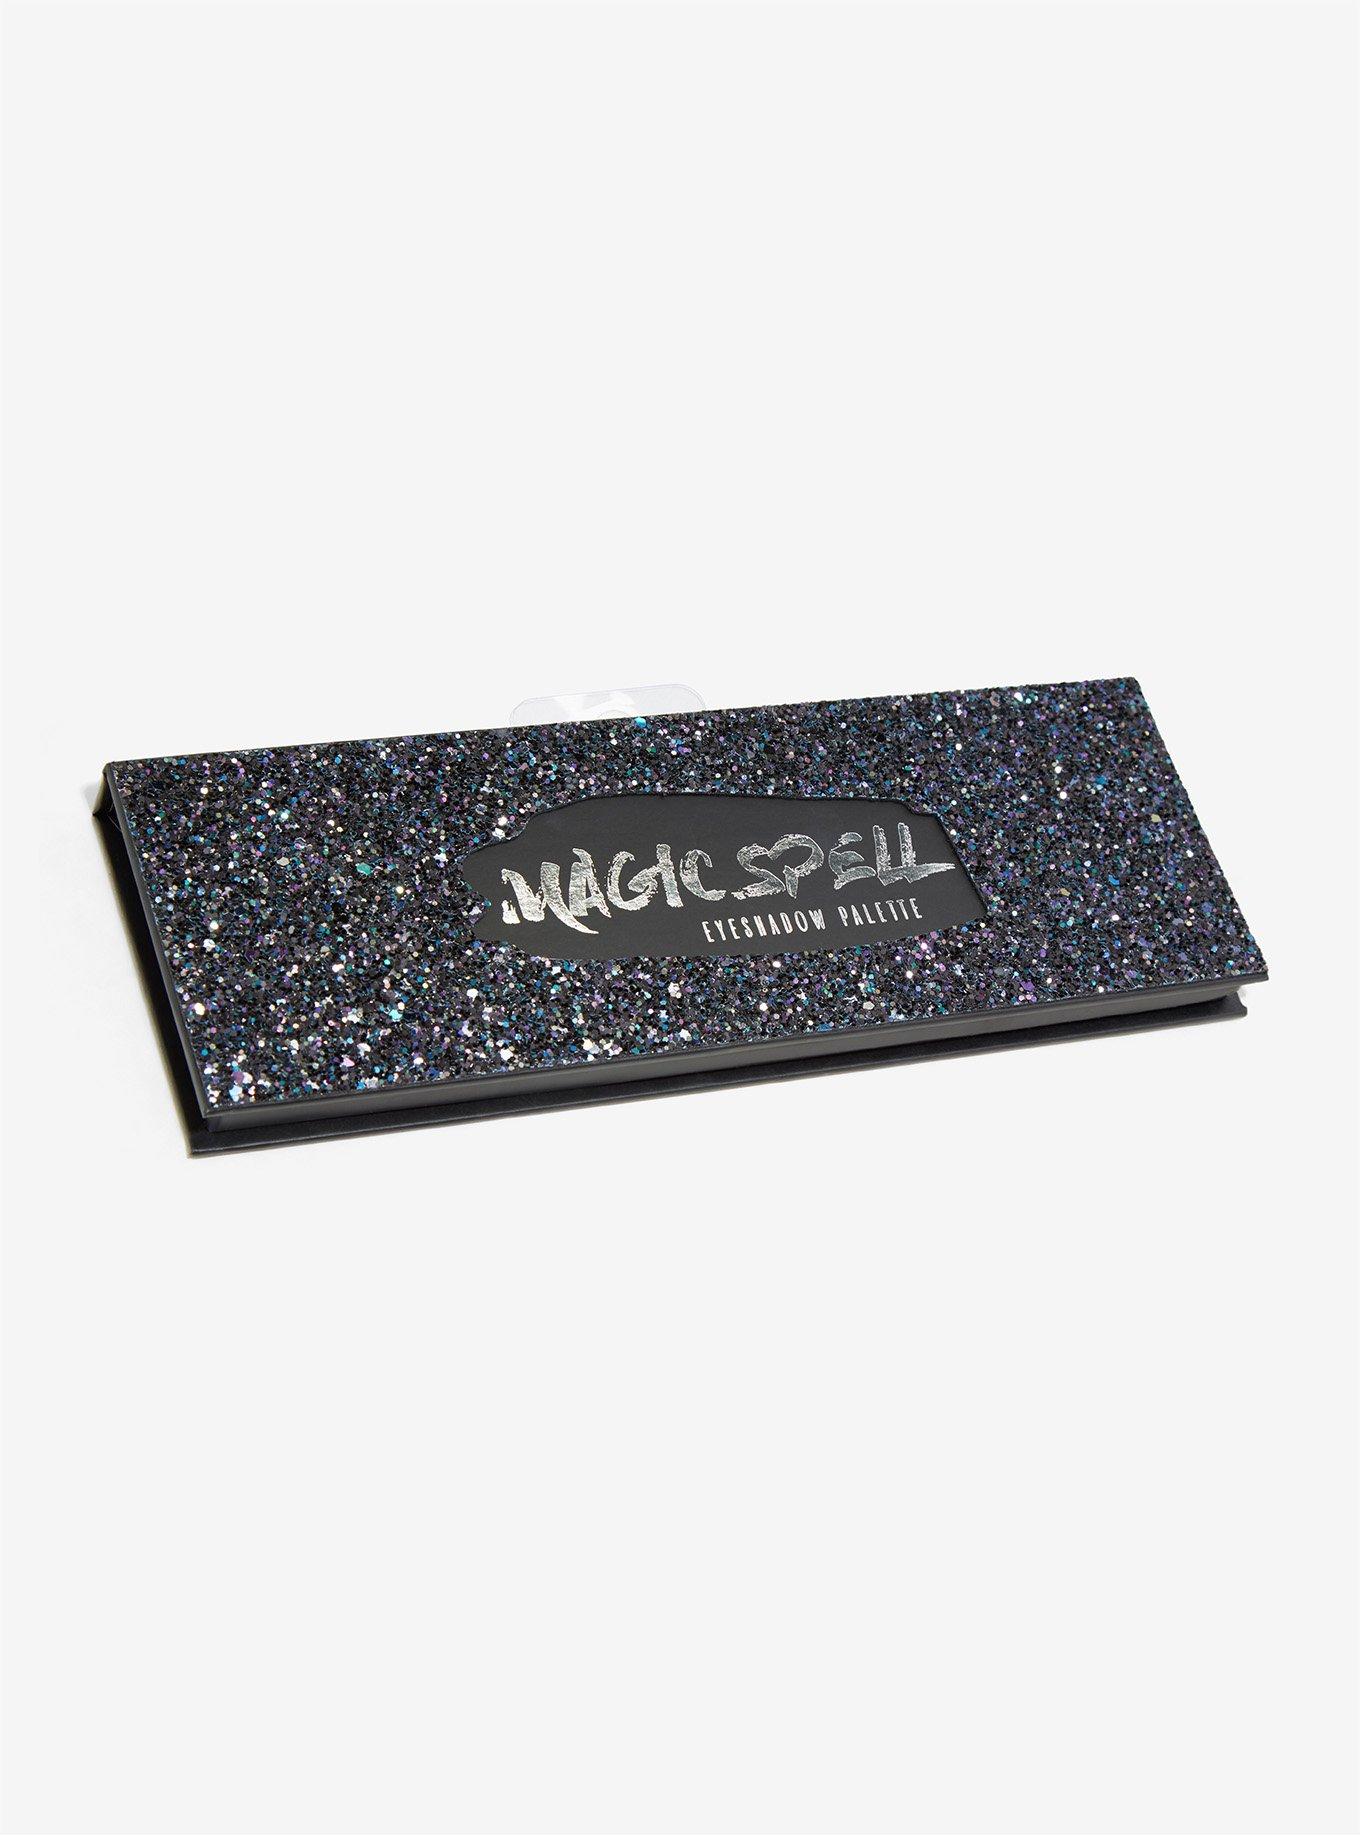 Blackheart Beauty Magic Spell Eyeshadow Collection Palette, , hi-res